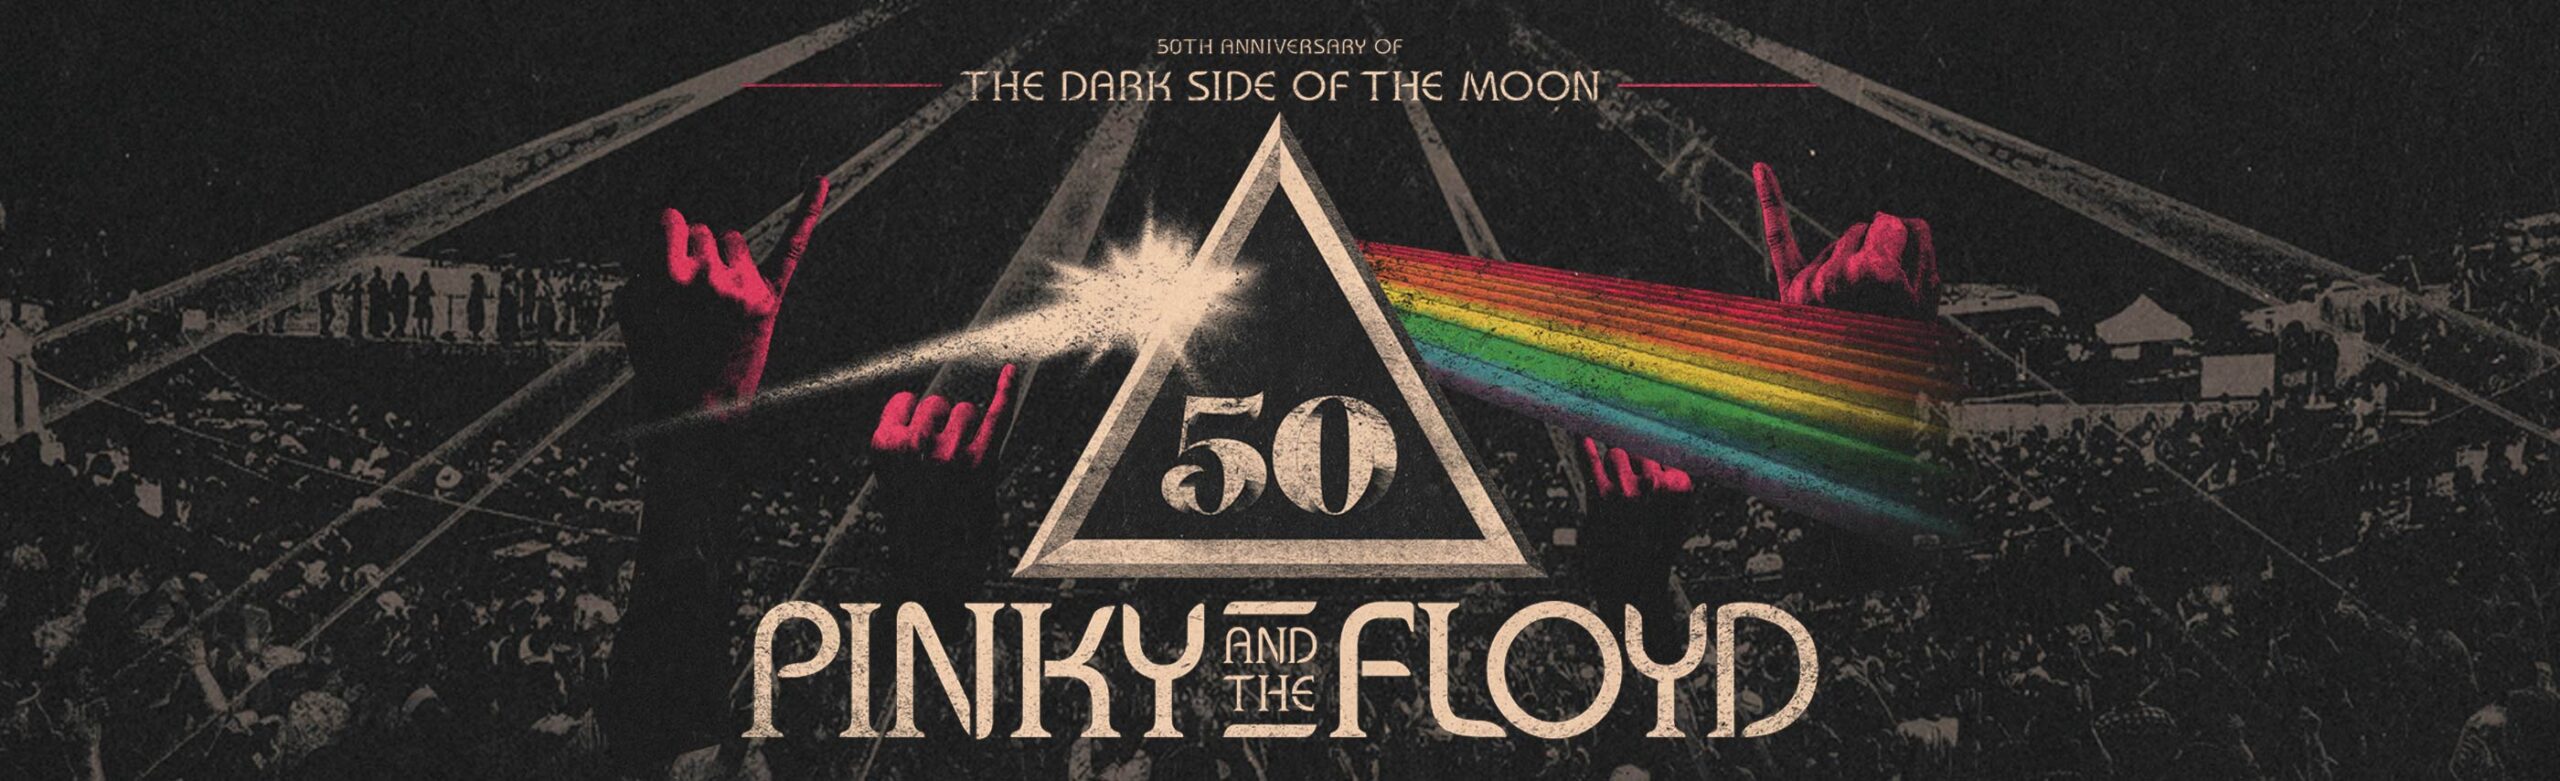 Pinky and The Floyd Announce Summer Concert at KettleHouse Amphitheater Image